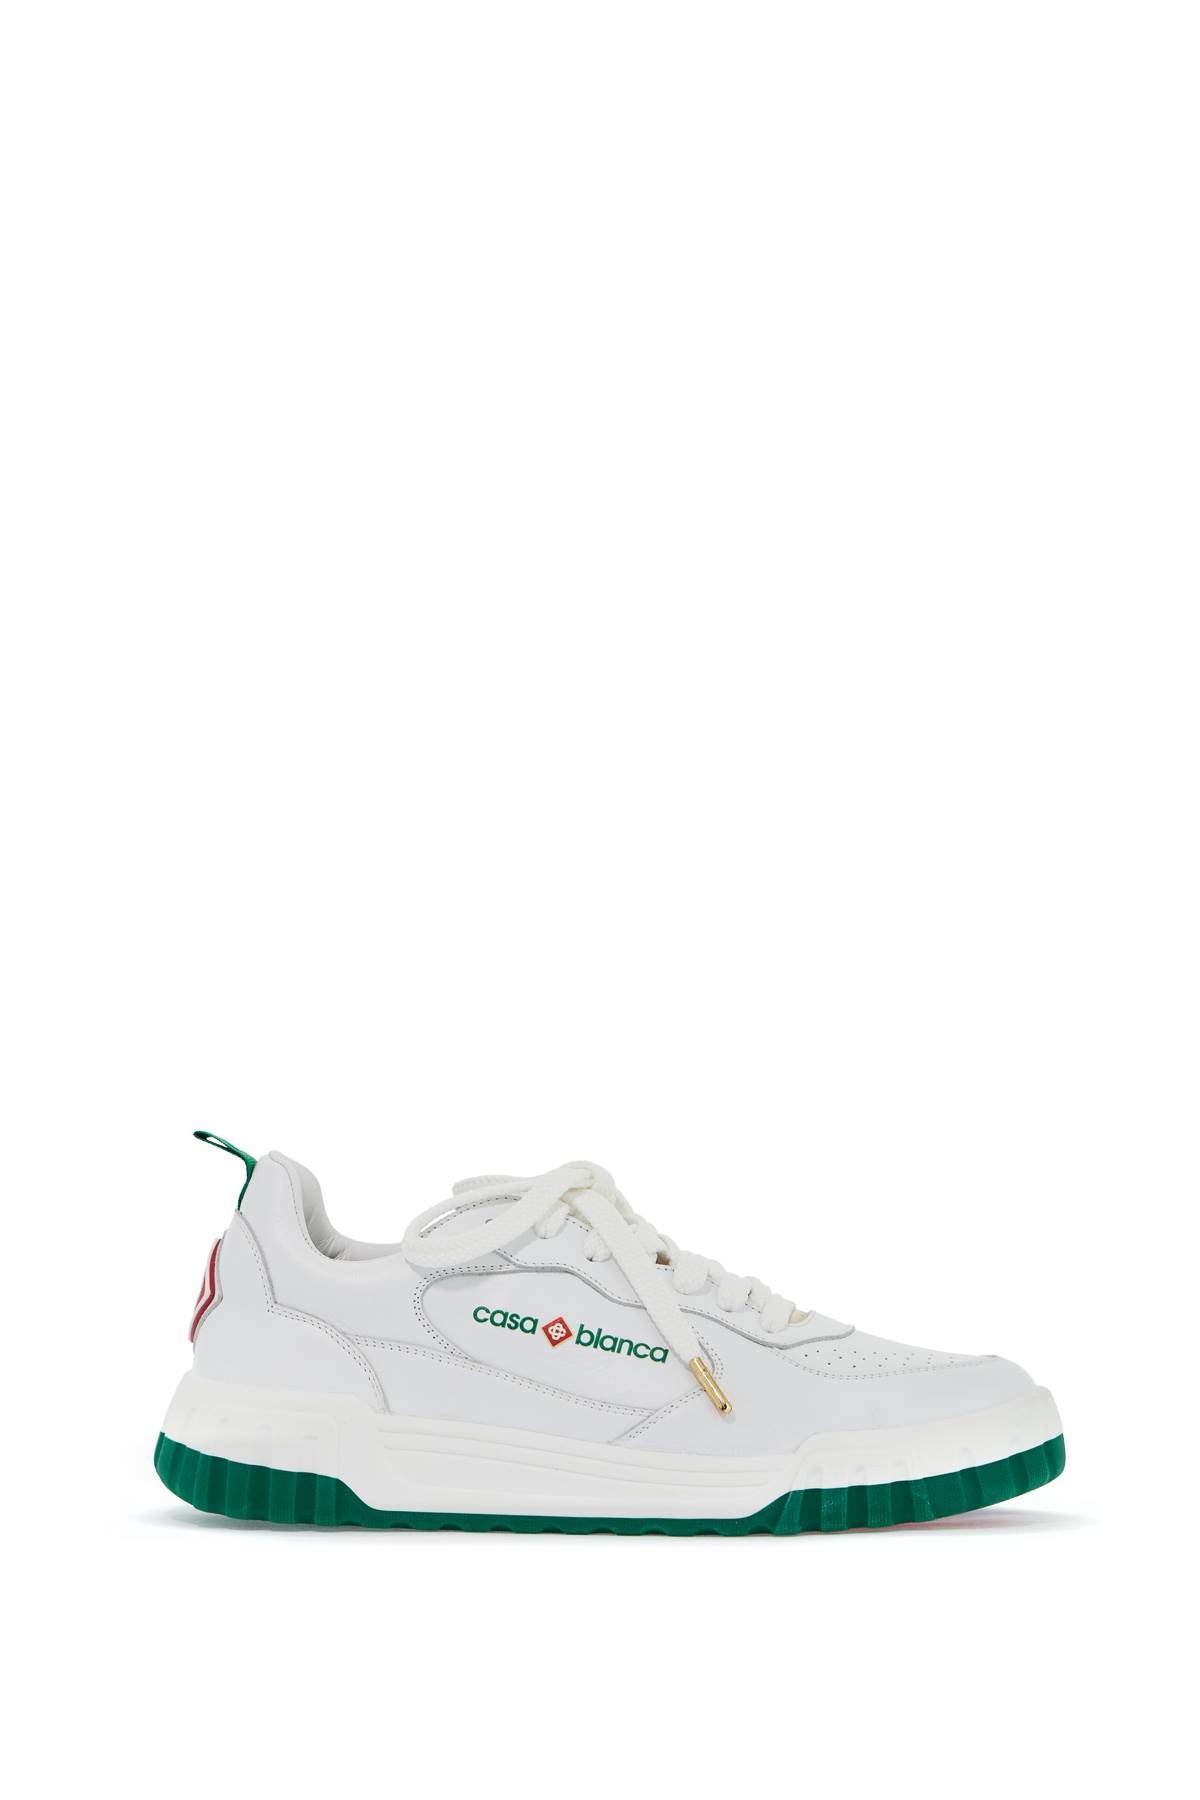 Casablanca CASABLANCA leather court sneakers for a